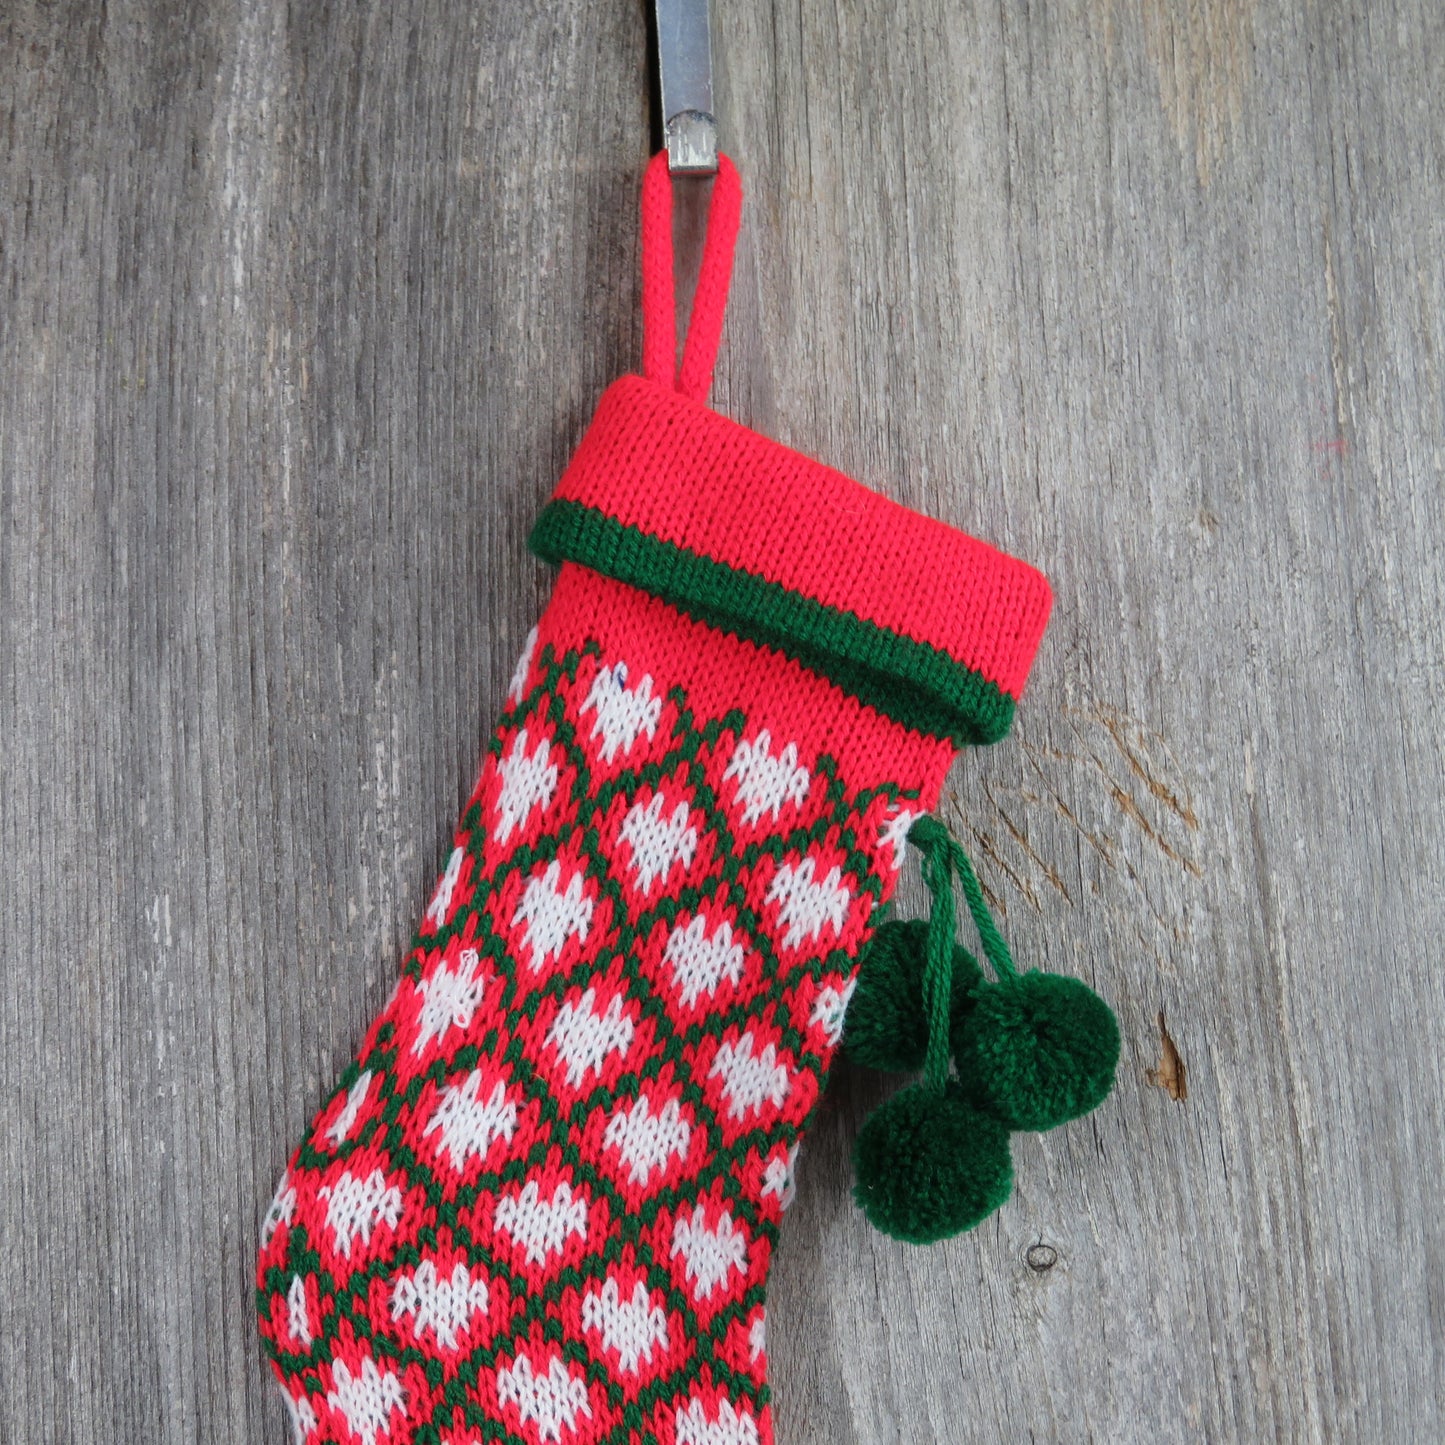 Vintage Mini Argyle Christmas Stocking Knitted Knit Red Green Pet Gift Bag - At Grandma's Table